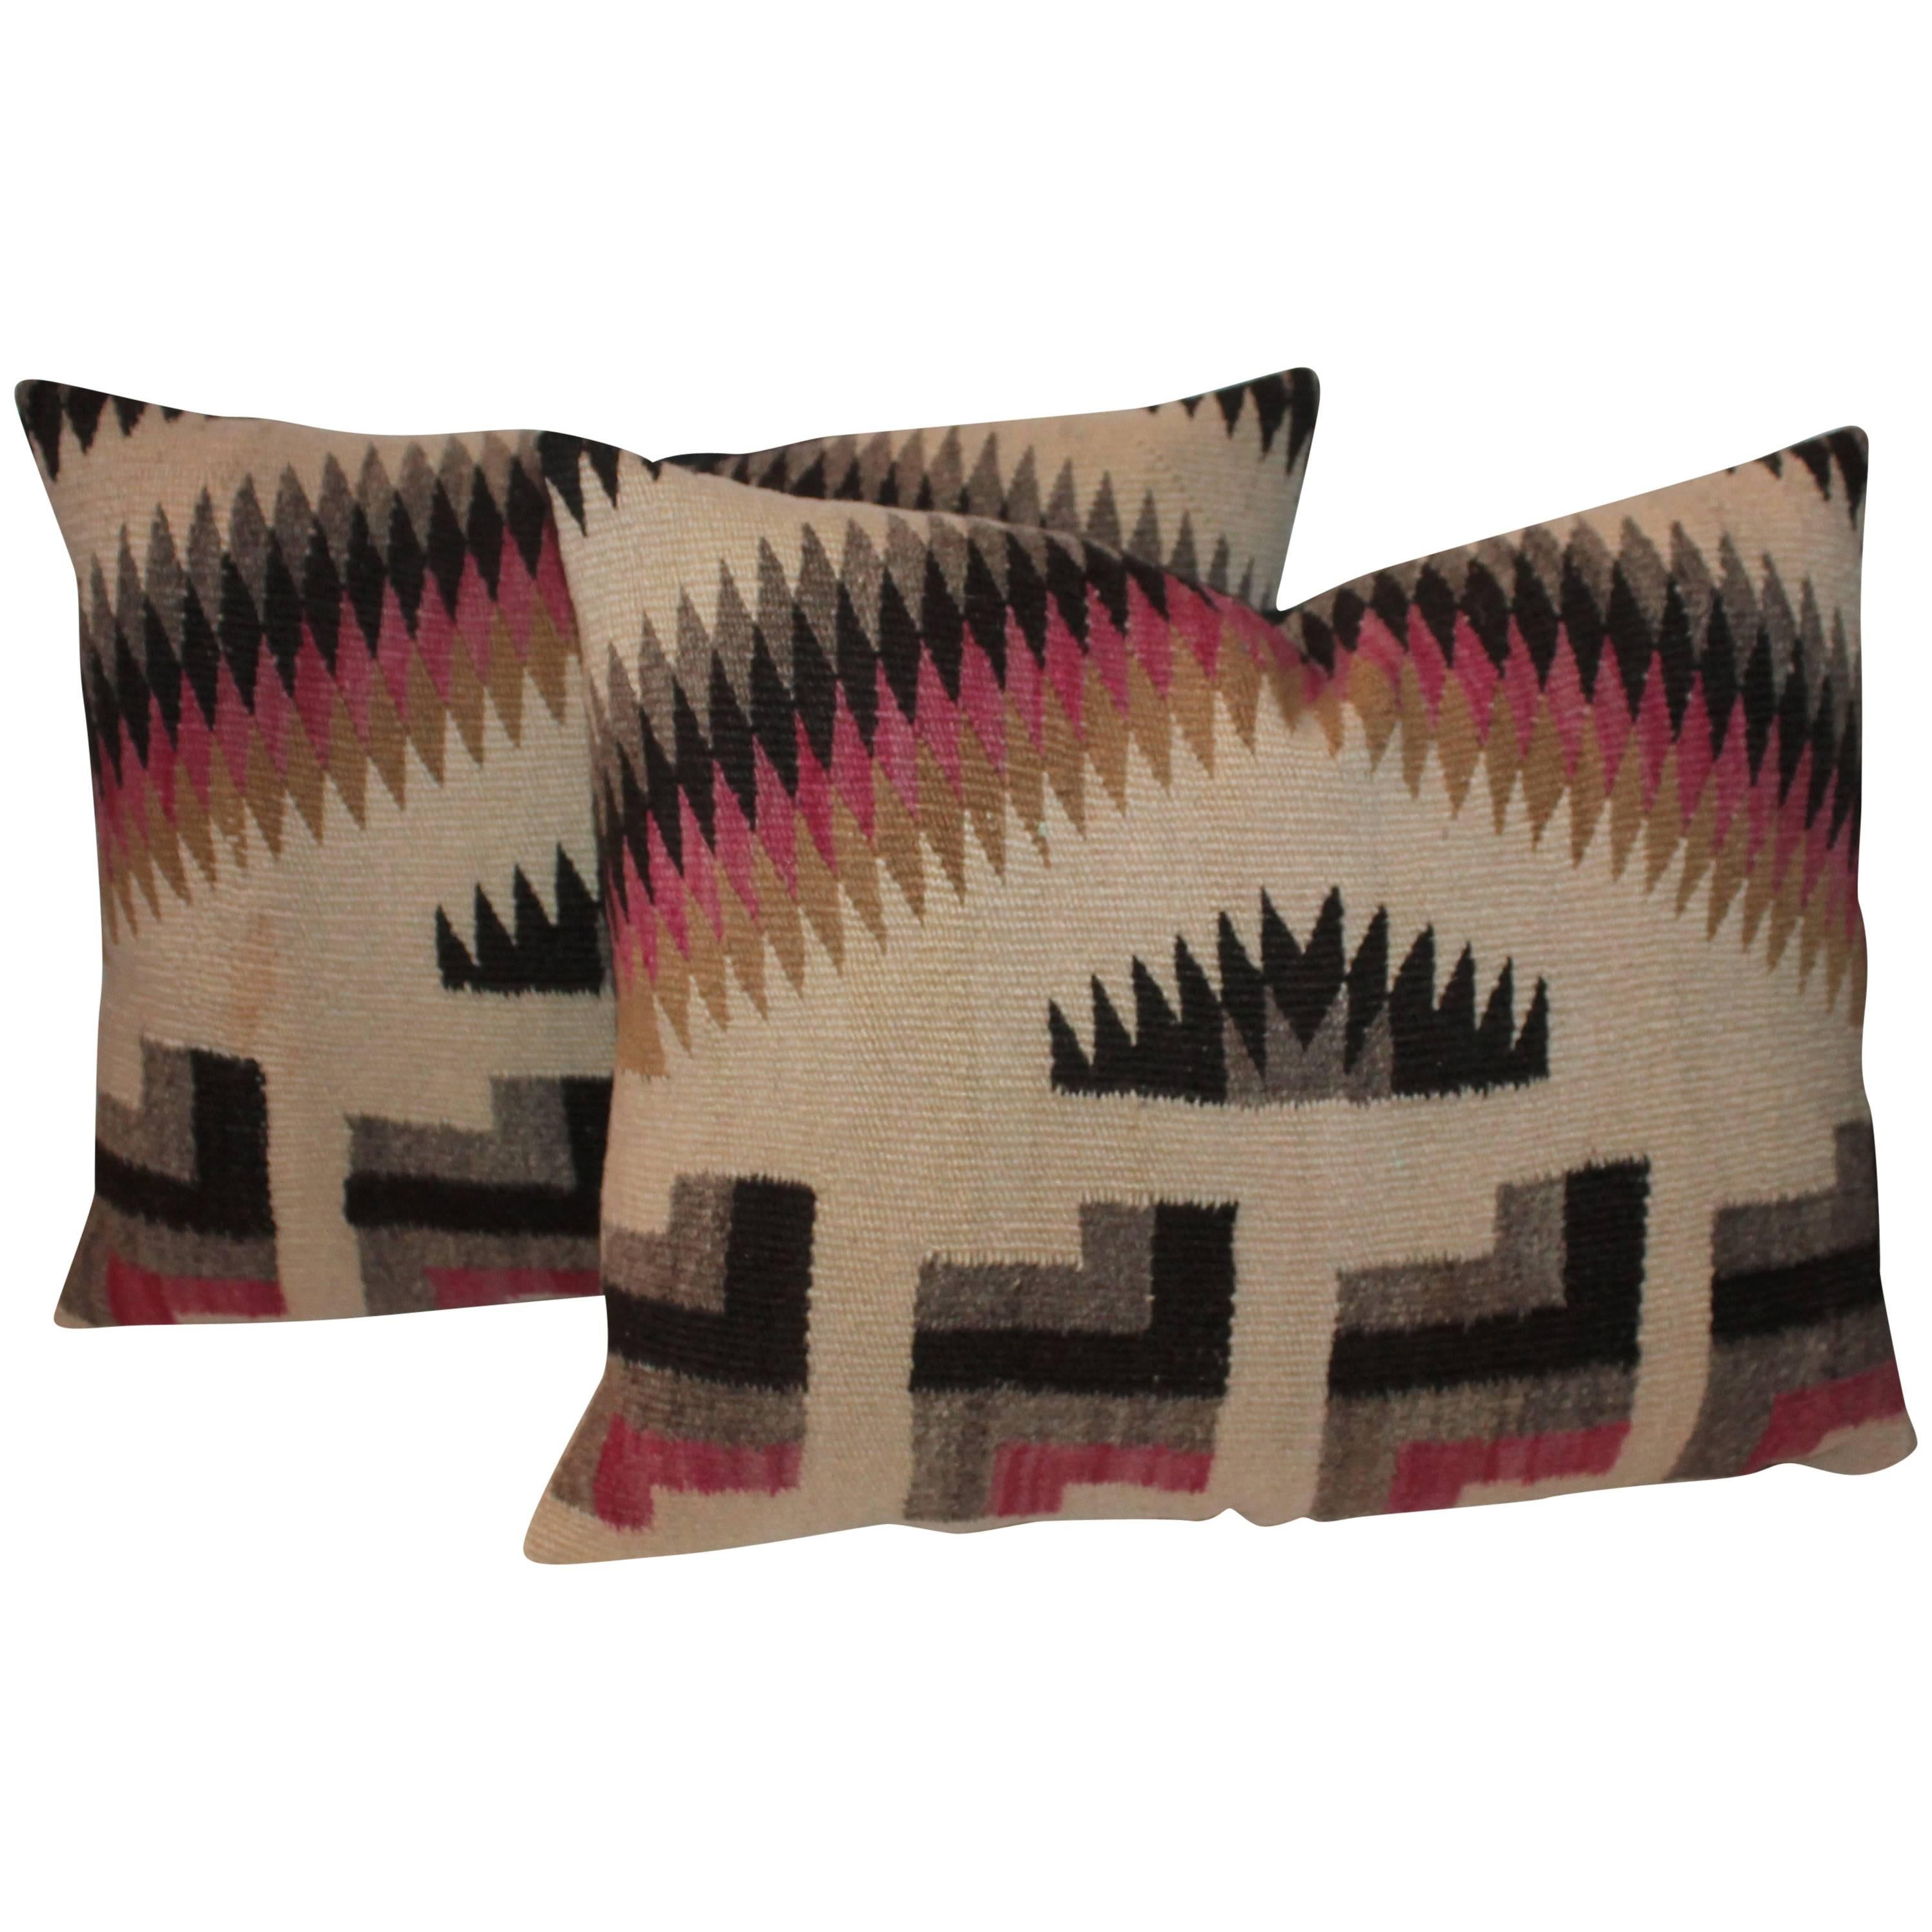 Pillows hand-crafted in New Mexico from thoughtfully curated vintage Navajo rugs and rich decor fabrics. traditional Spanish weavings